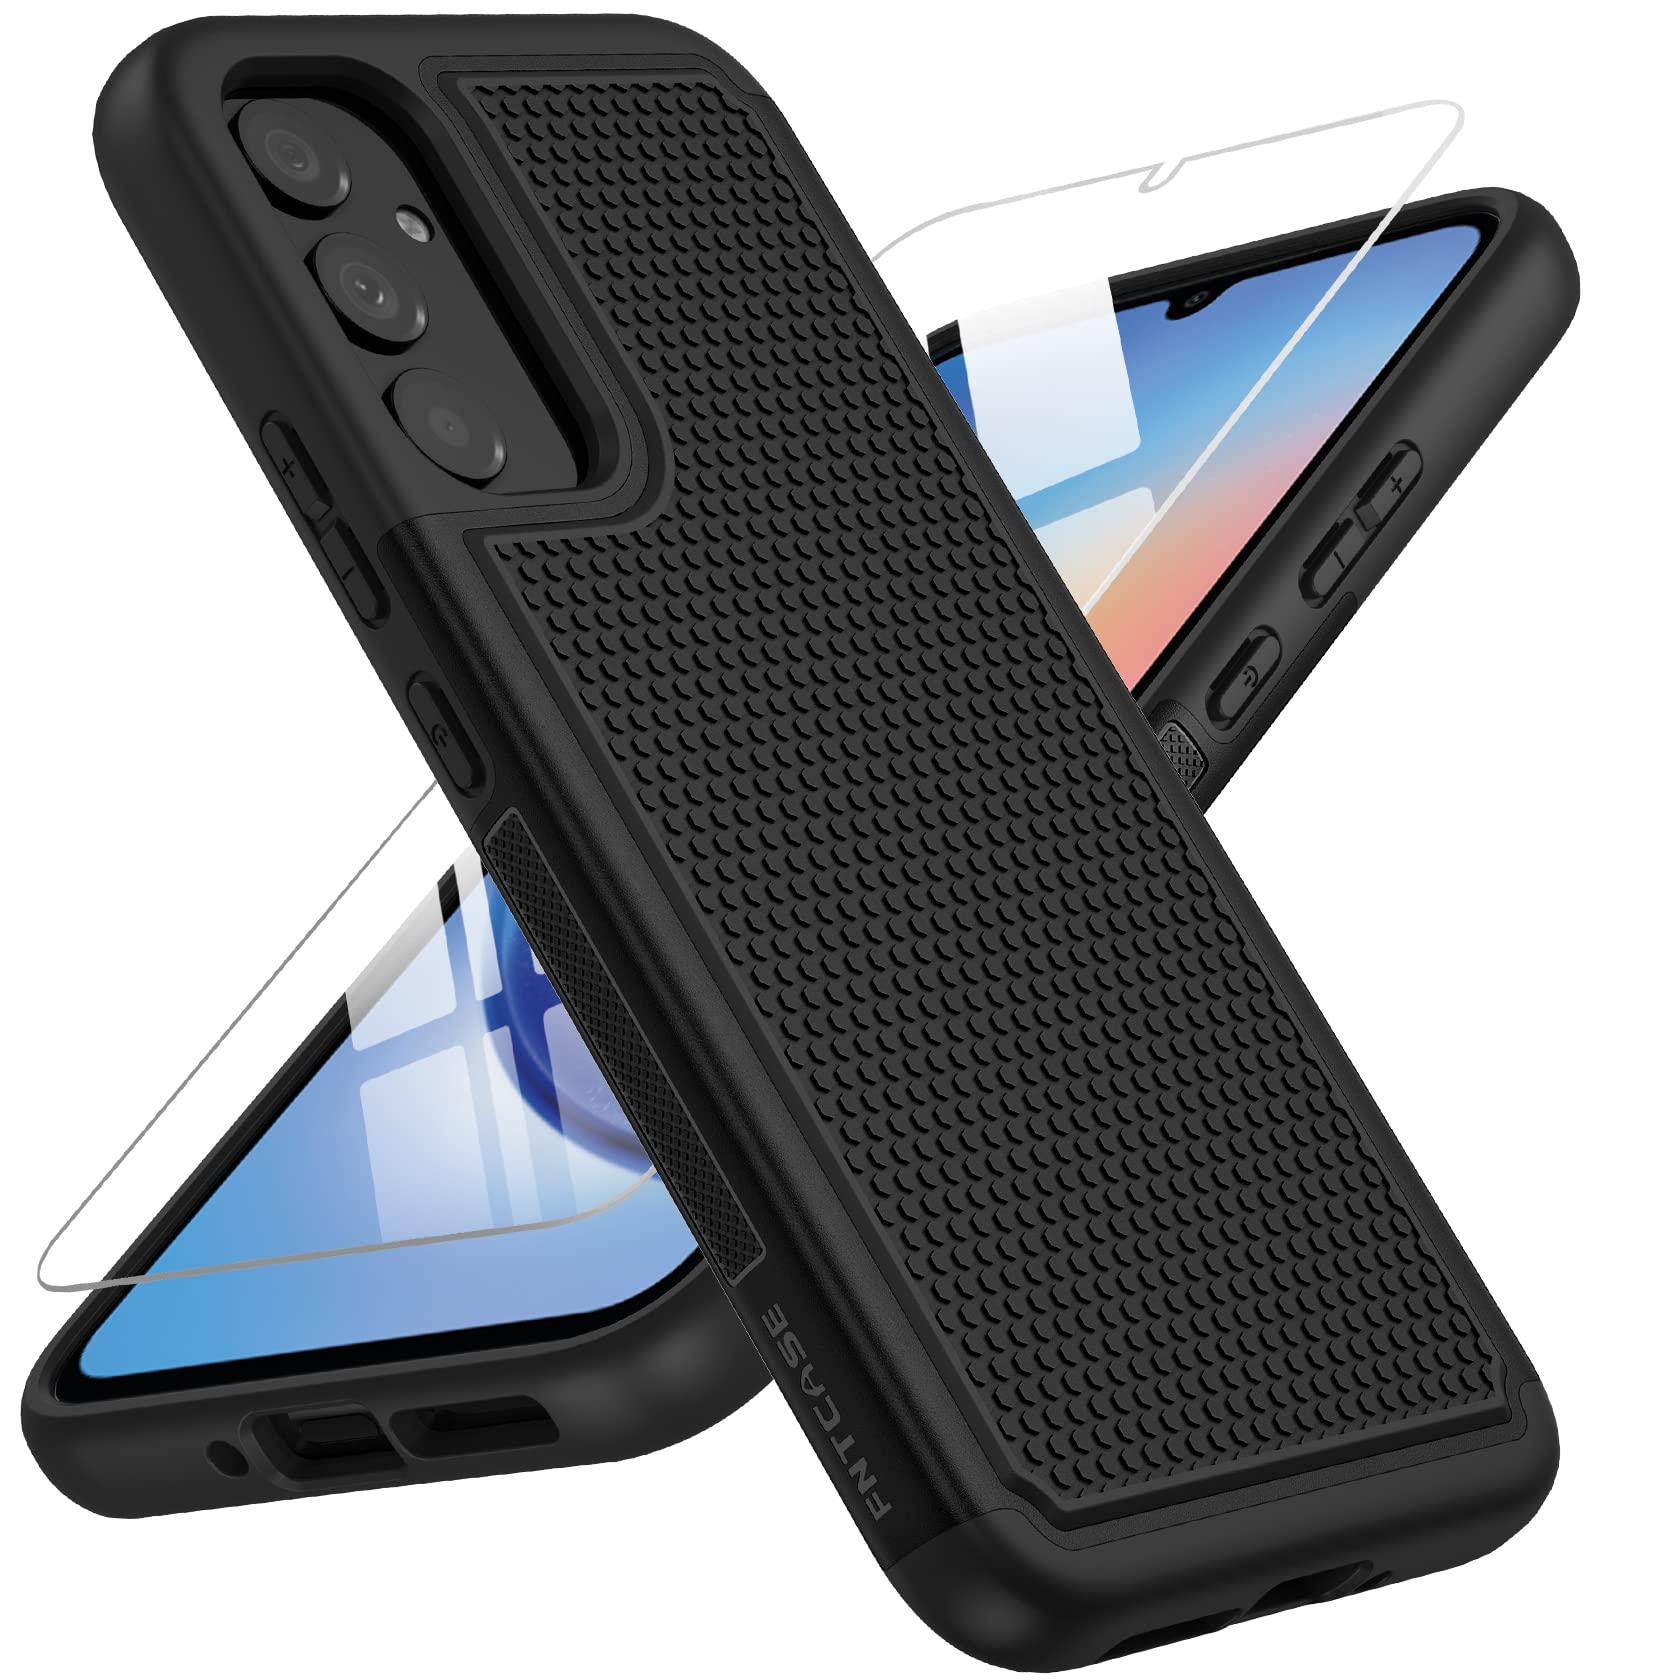 Samsung A34 5G Case: Dual Layer Shockproof Drop Protection Galaxy A34 Phone Case - FNTCASE OFFICIAL